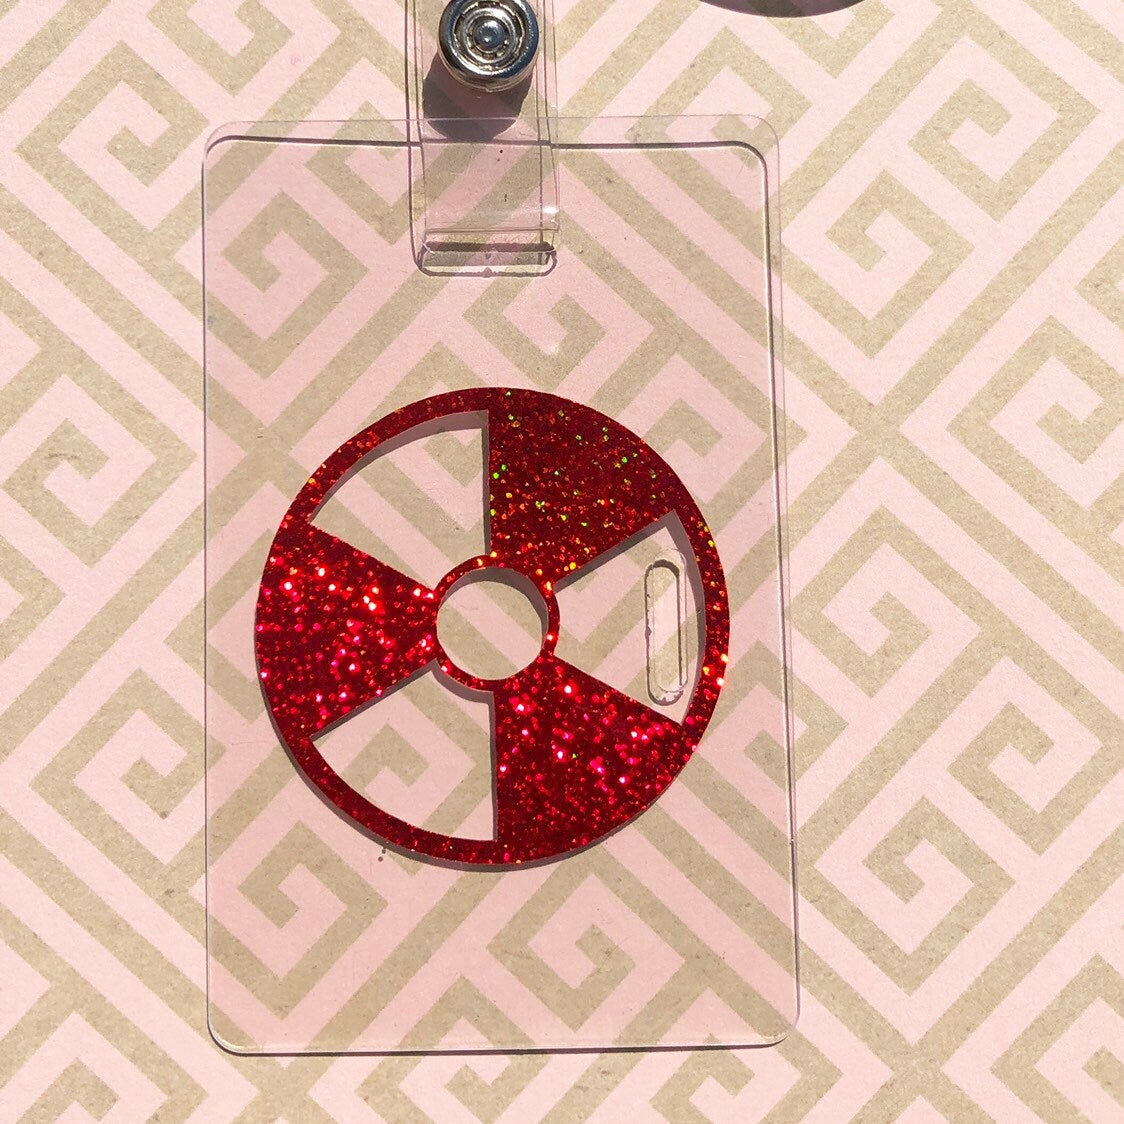 Rad Pad for Holding Xray Markers Holographic Radiation Symbol Red